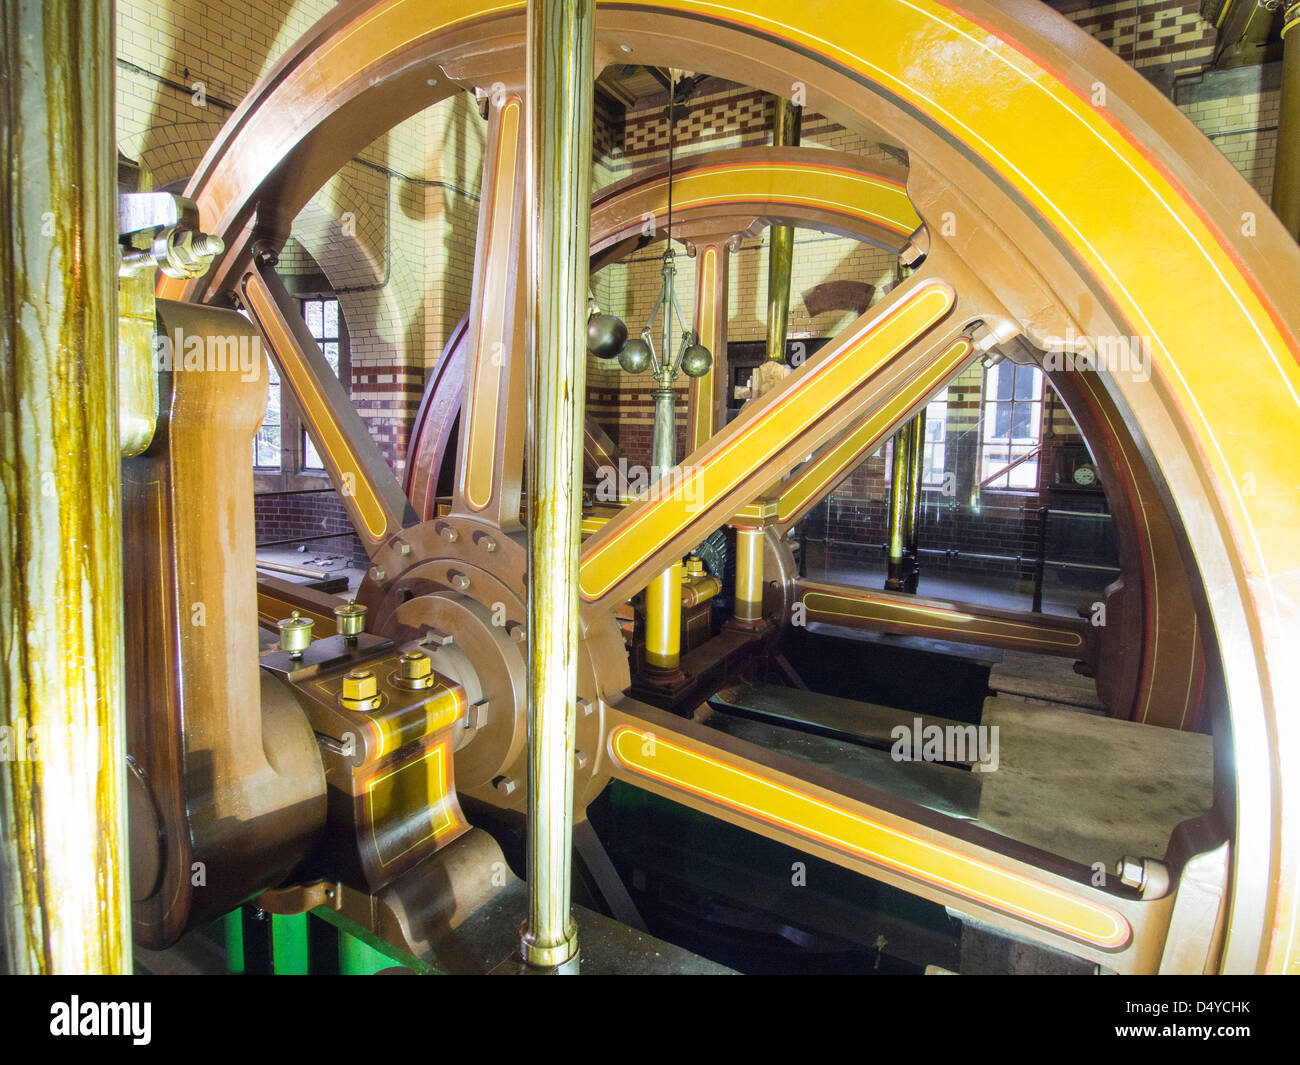 A Victorian steam engine in a sewage pumping station in Leicester, UK. Stock Photo